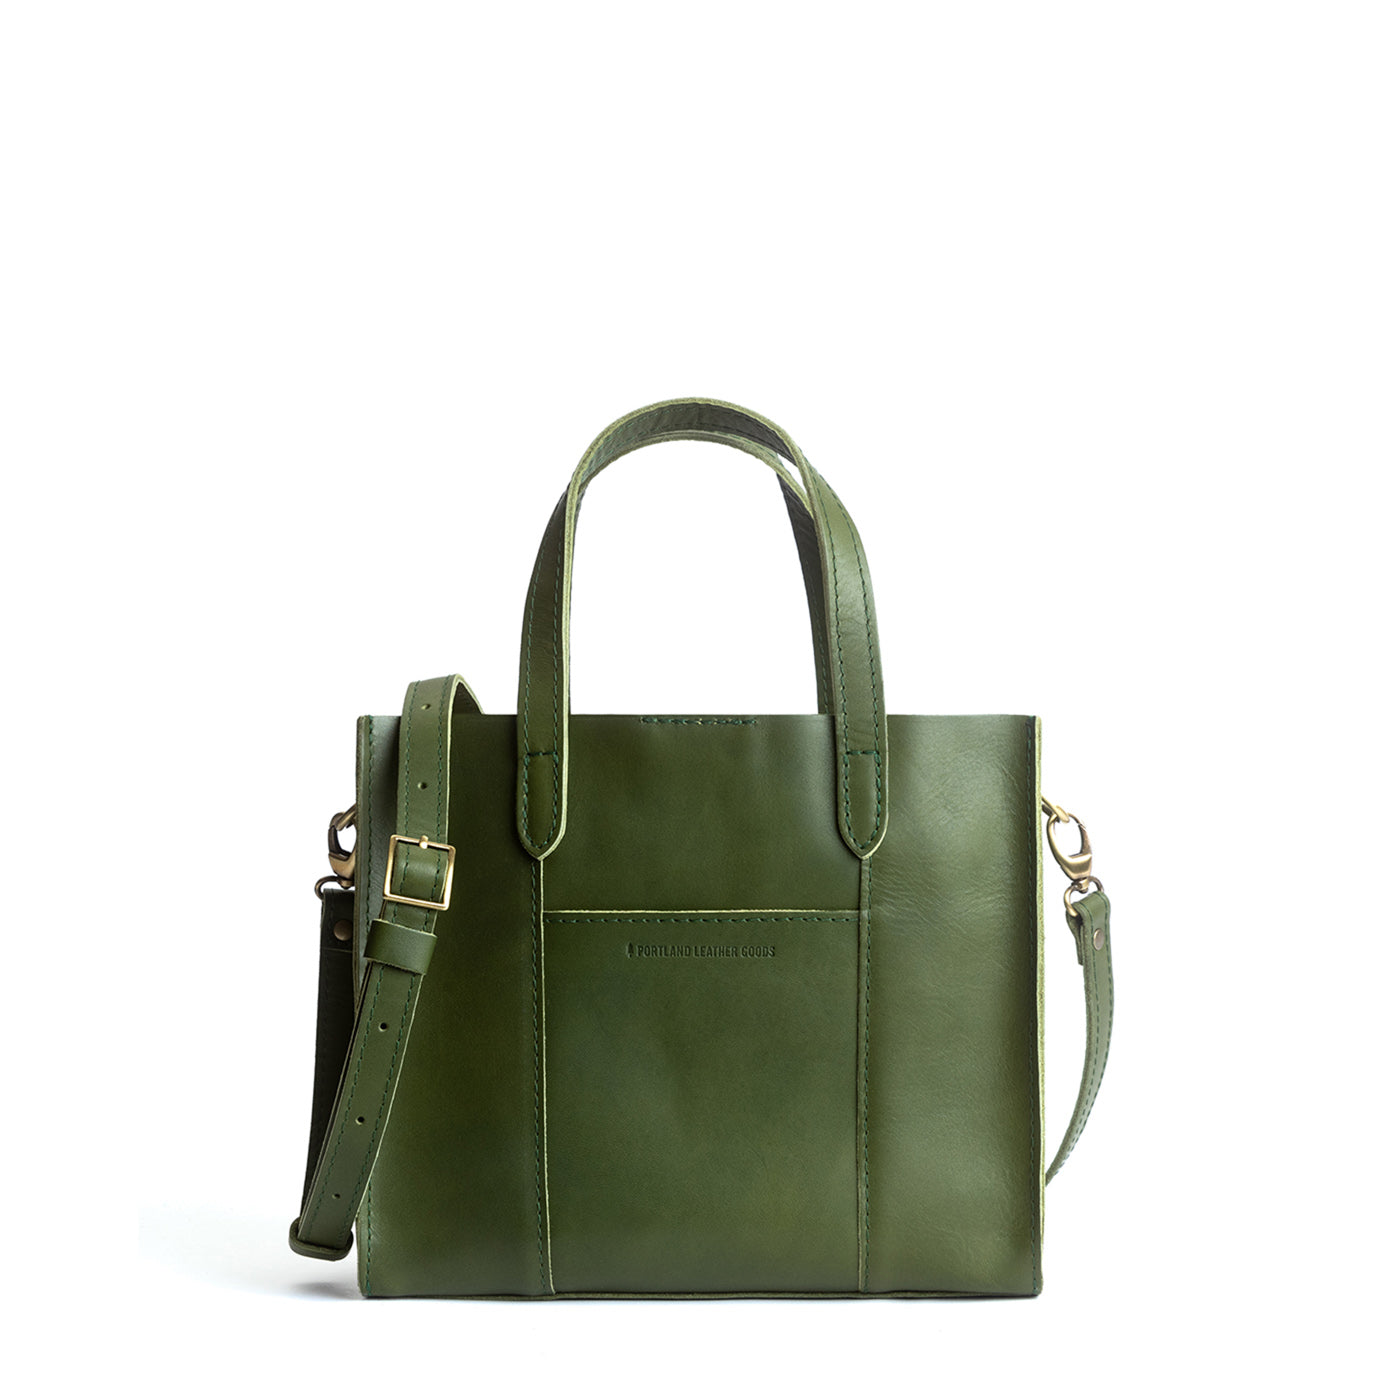 PIne | Structured mid-size tote bag with overlapping panels and crossbody strap